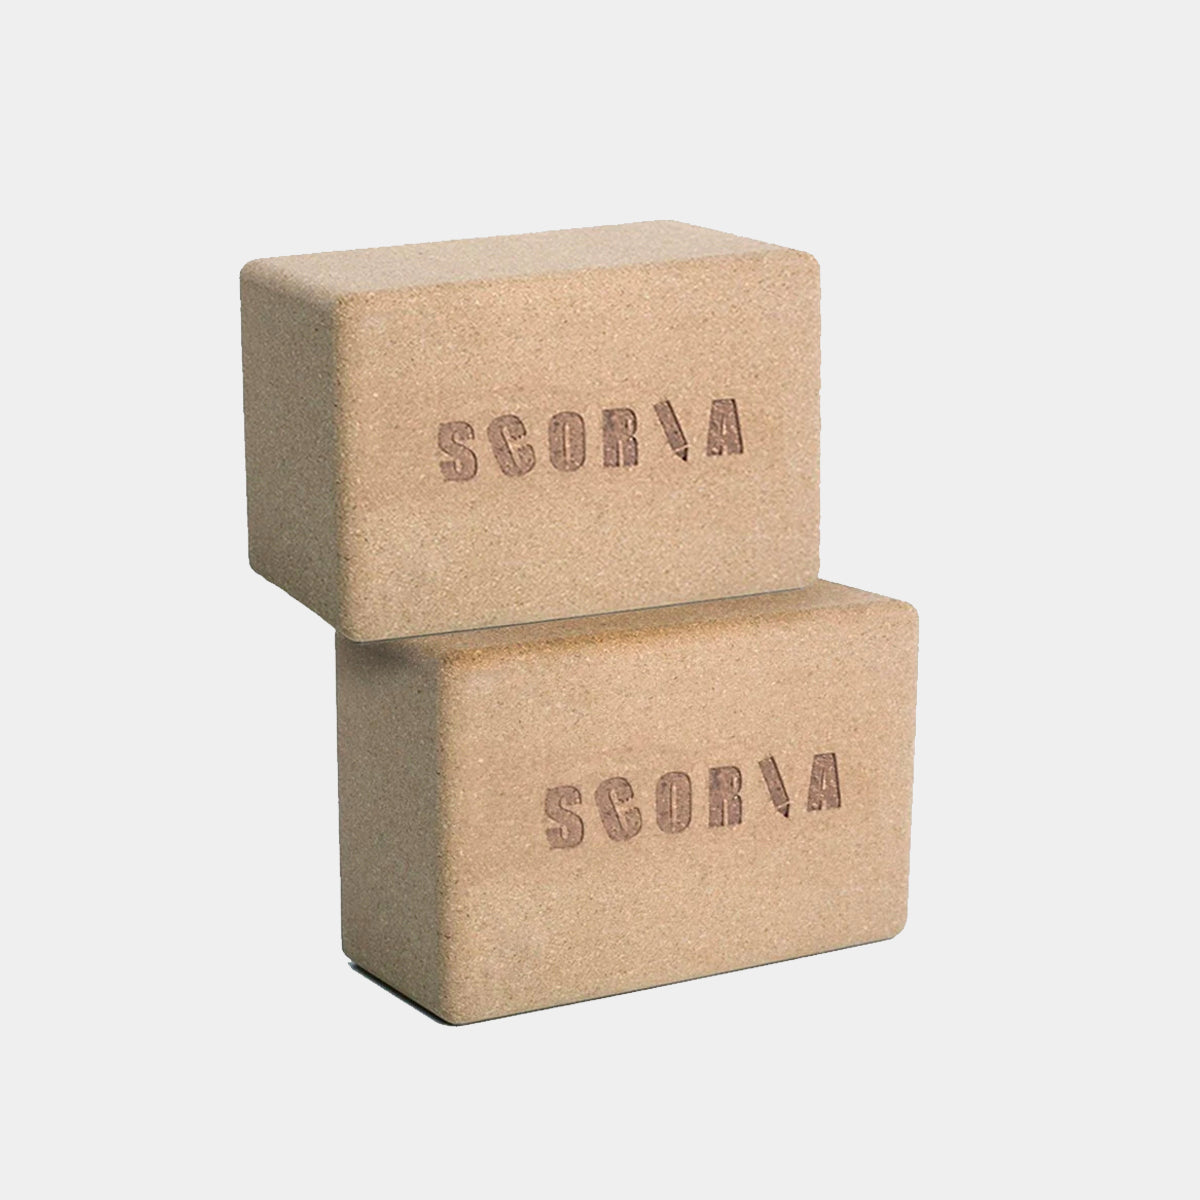 These Cork Blocks Are the Yoga Props Worth Investing In